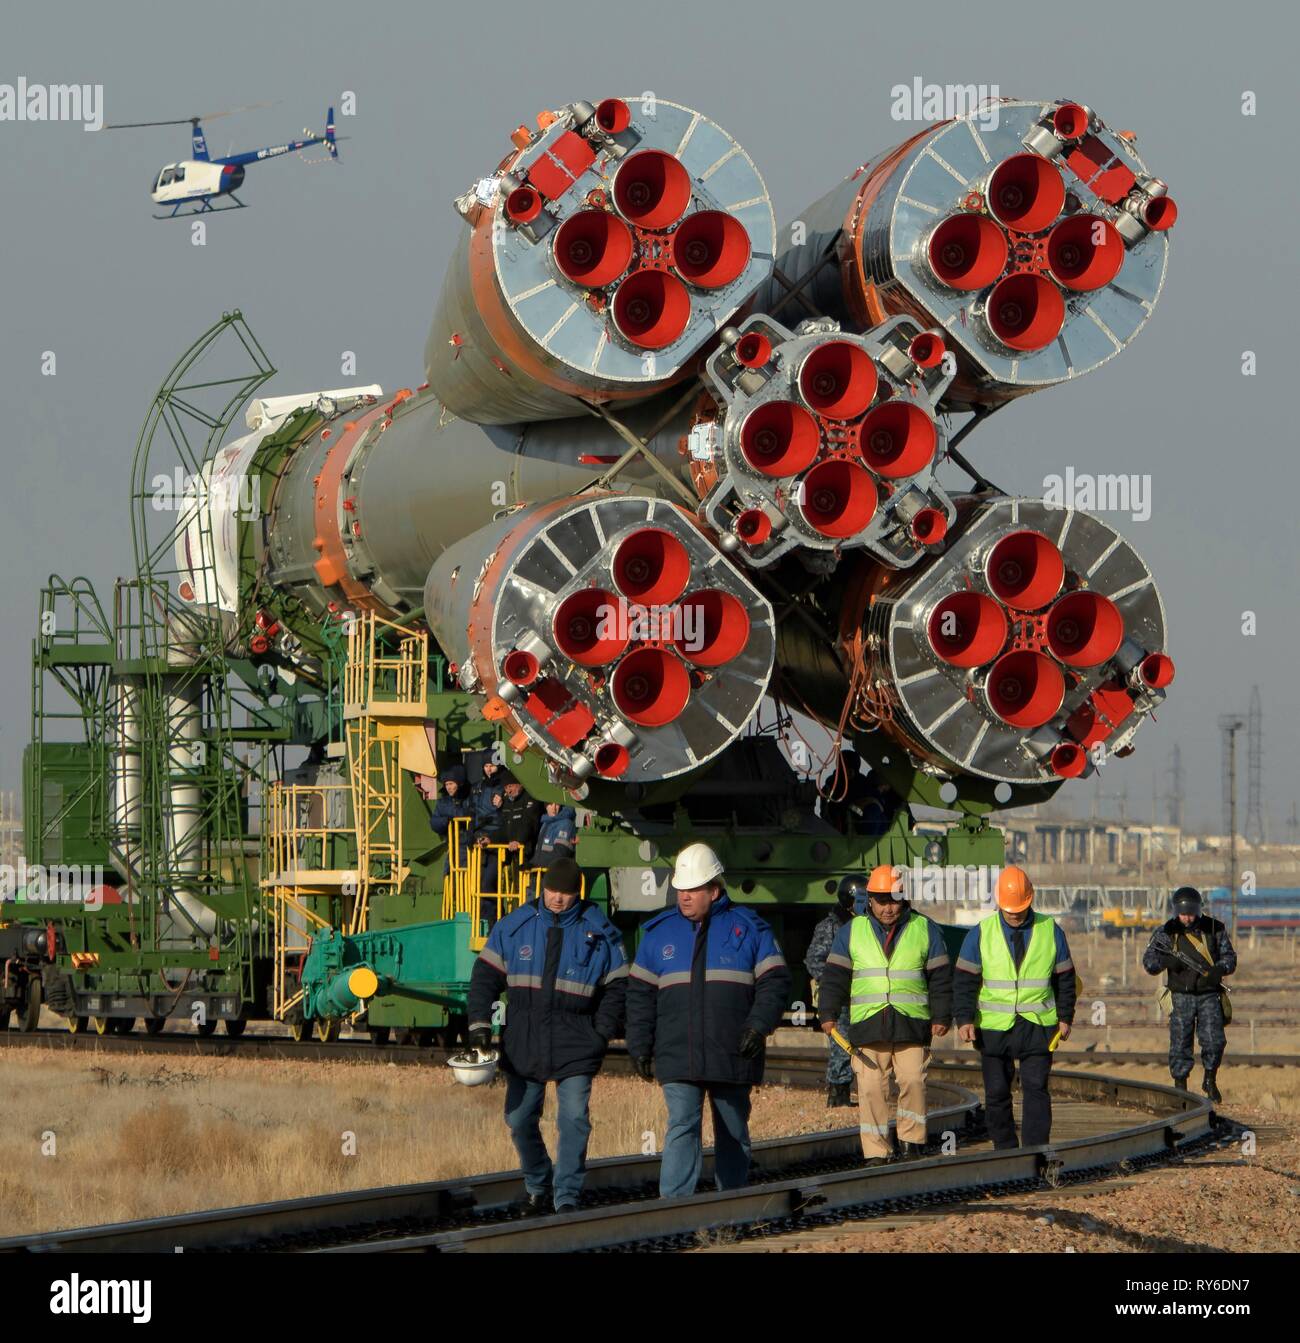 Baikonur, Kazakhstan. 12th Mar, 2019. The Russian Soyuz MS-12 rocket is transported by train to the launch pad at the Baikonur Cosmodrome March 12, 2019 in Baikonur, Kazakhstan. The Expedition 59 crew: Nick Hague and Christina Koch of NASA and Alexey Ovchinin of Roscosmos will launch March 14th for a six-and-a-half month mission on the International Space Station. Credit: Planetpix/Alamy Live News Stock Photo